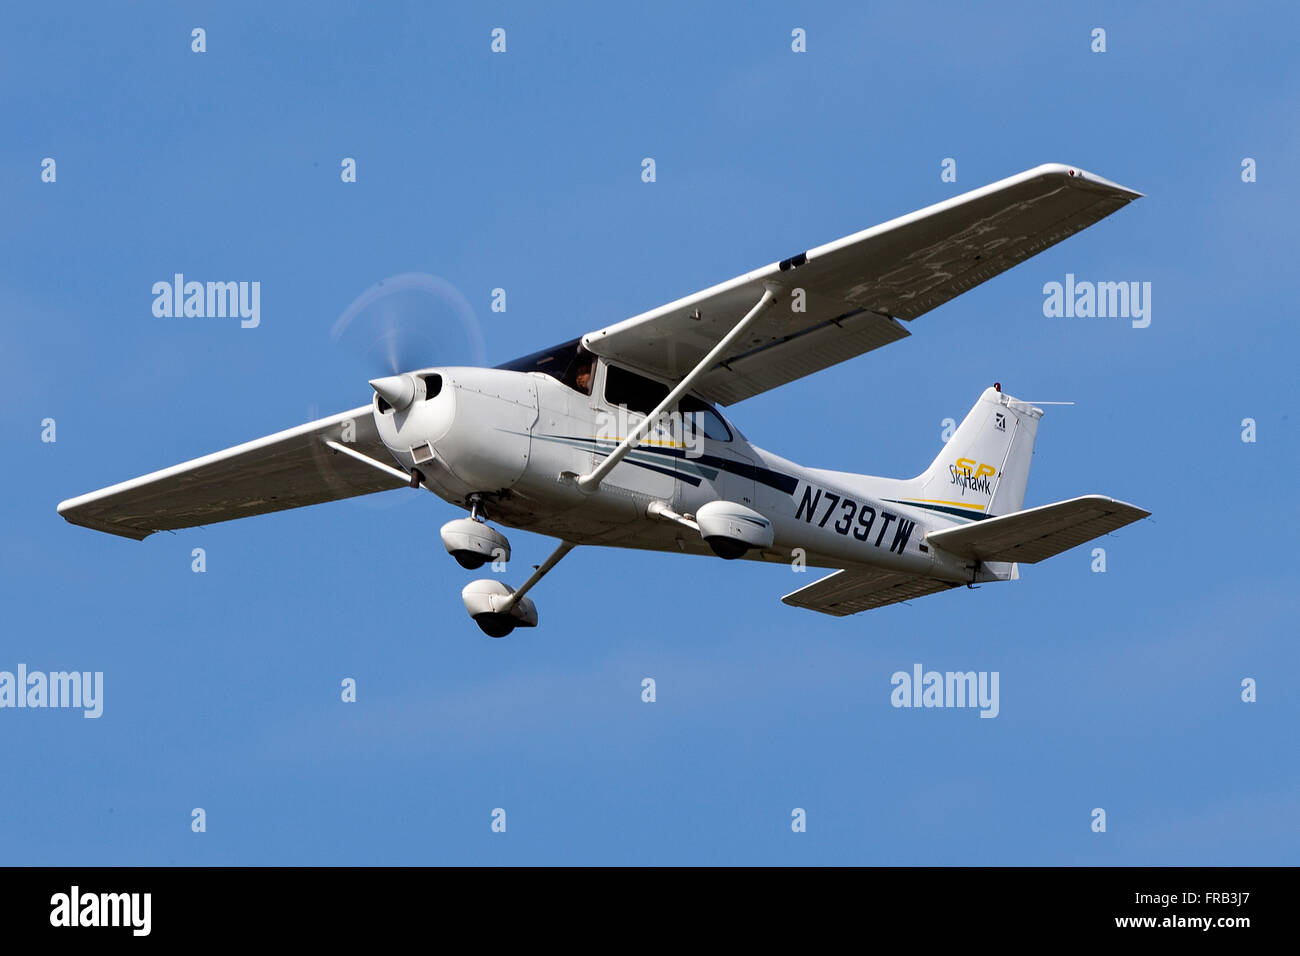 Cessna 172S (registration N739TW) takes off from Palo Alto Airport (KPAO), Palo Alto, California, United States of America Stock Photo